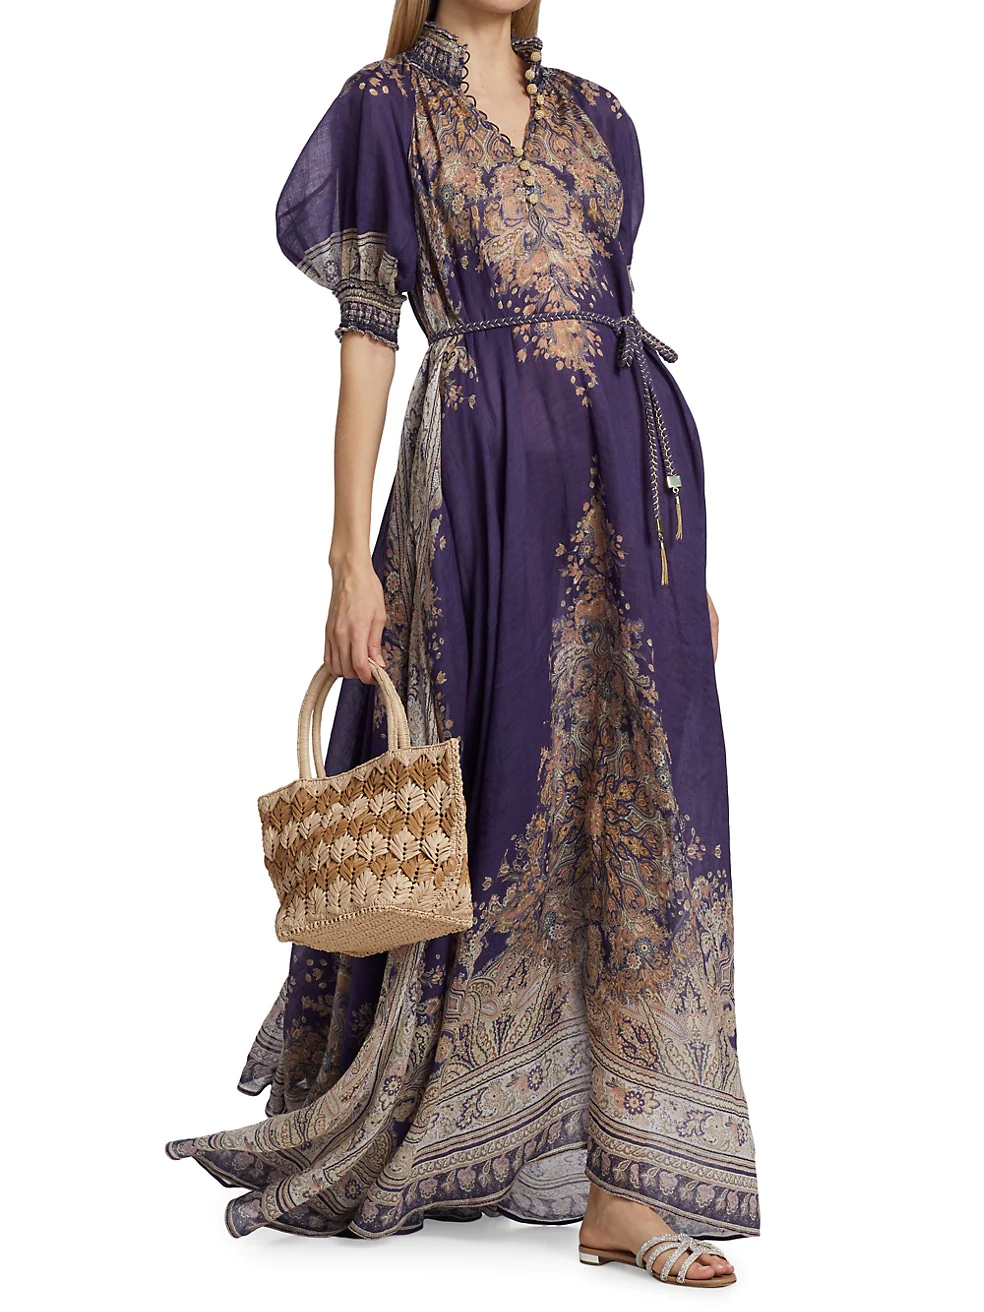 Transition from Summer to Fall - saks fifth avenue, Zimmerman dress